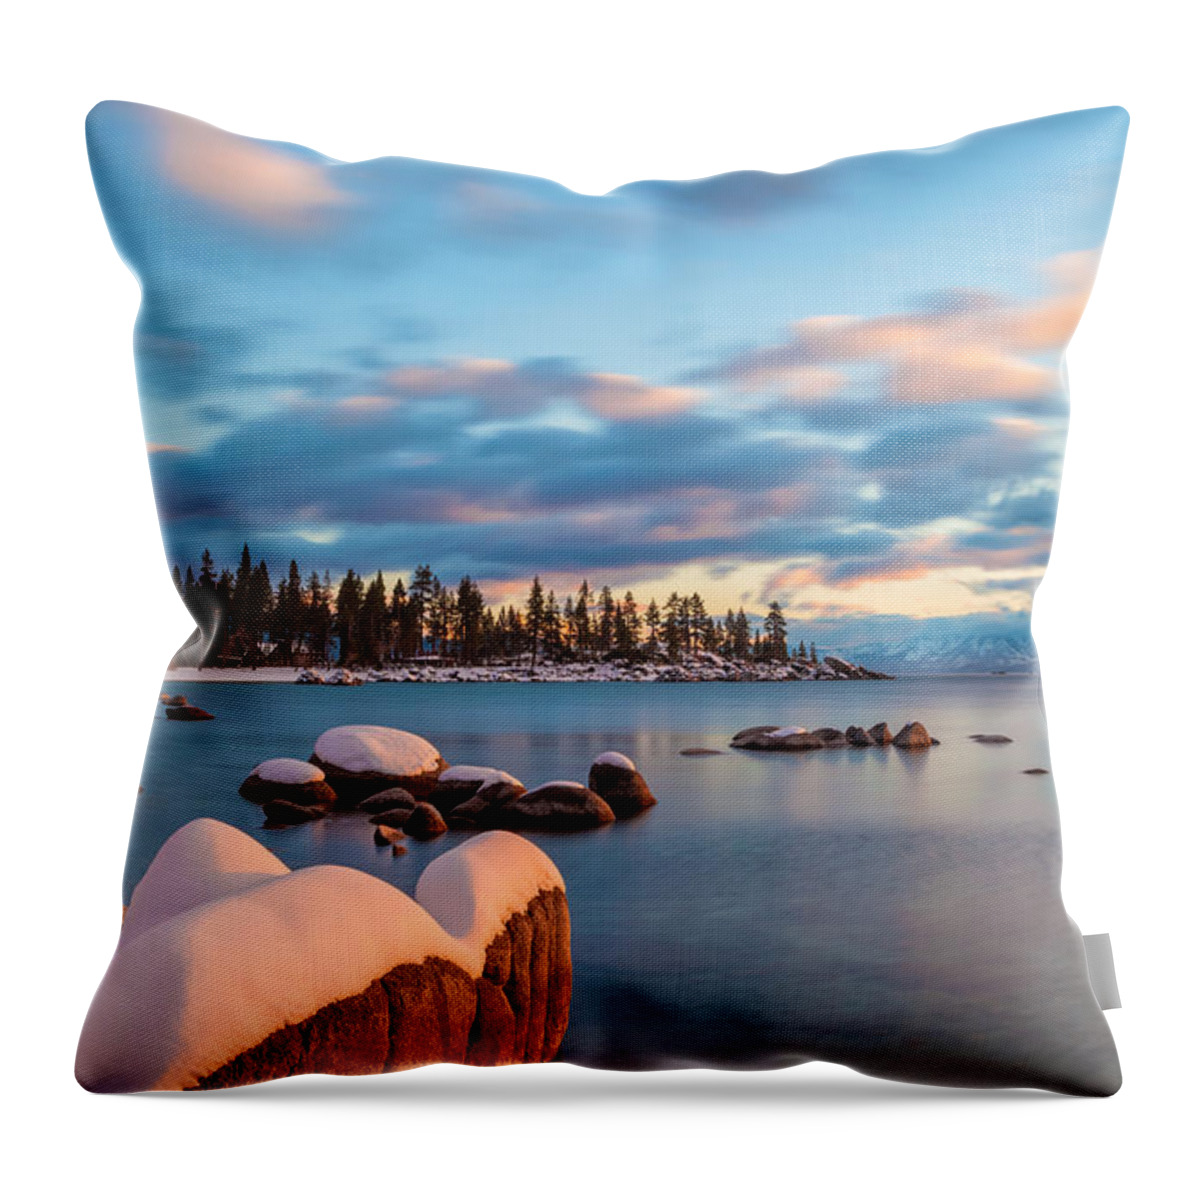 Landscape Throw Pillow featuring the photograph Sound Of The Winter by Jonathan Nguyen